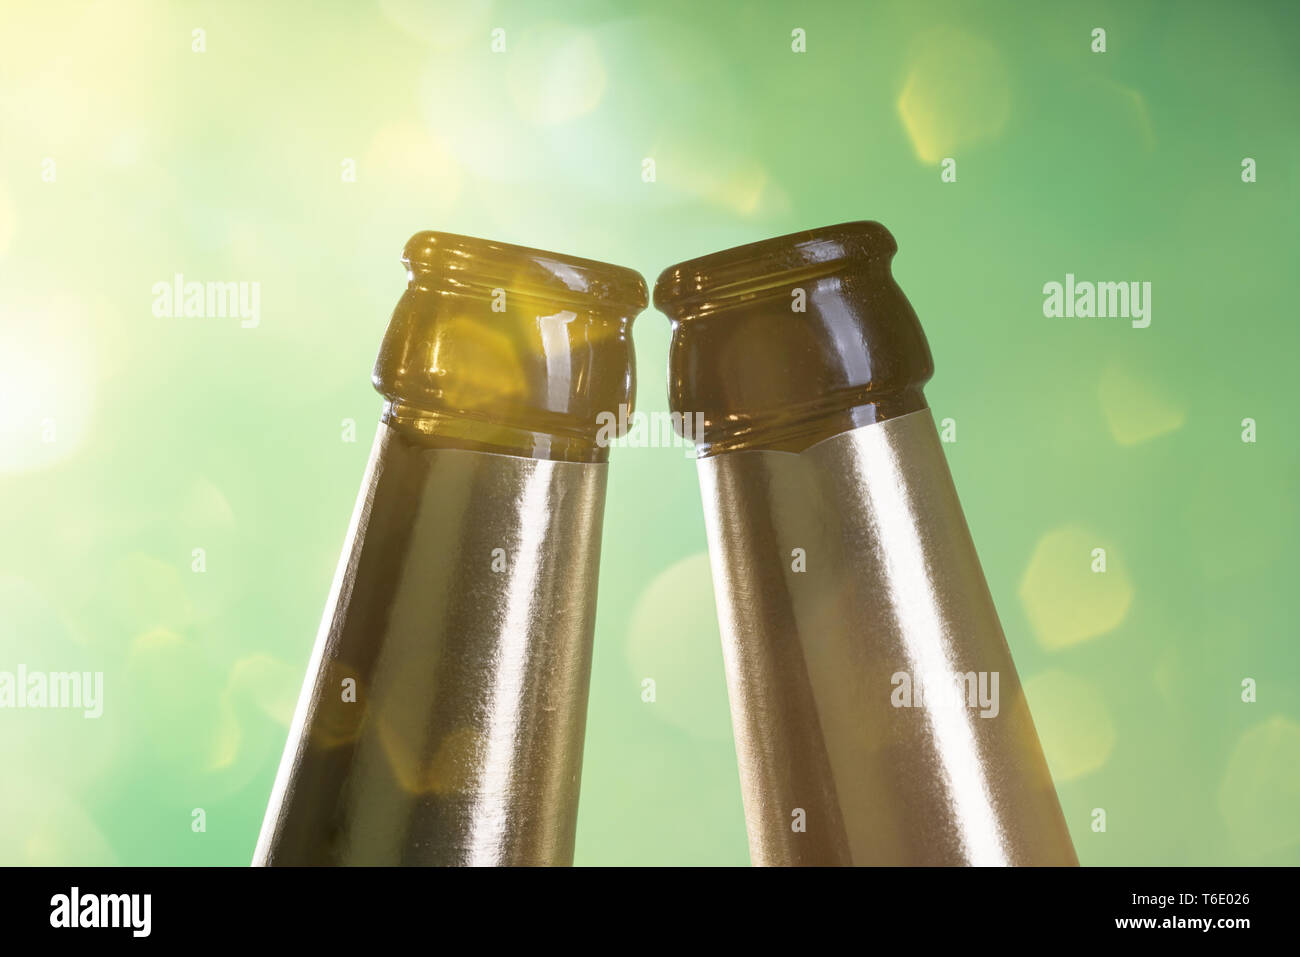 two beer bottle necks with green background Stock Photo